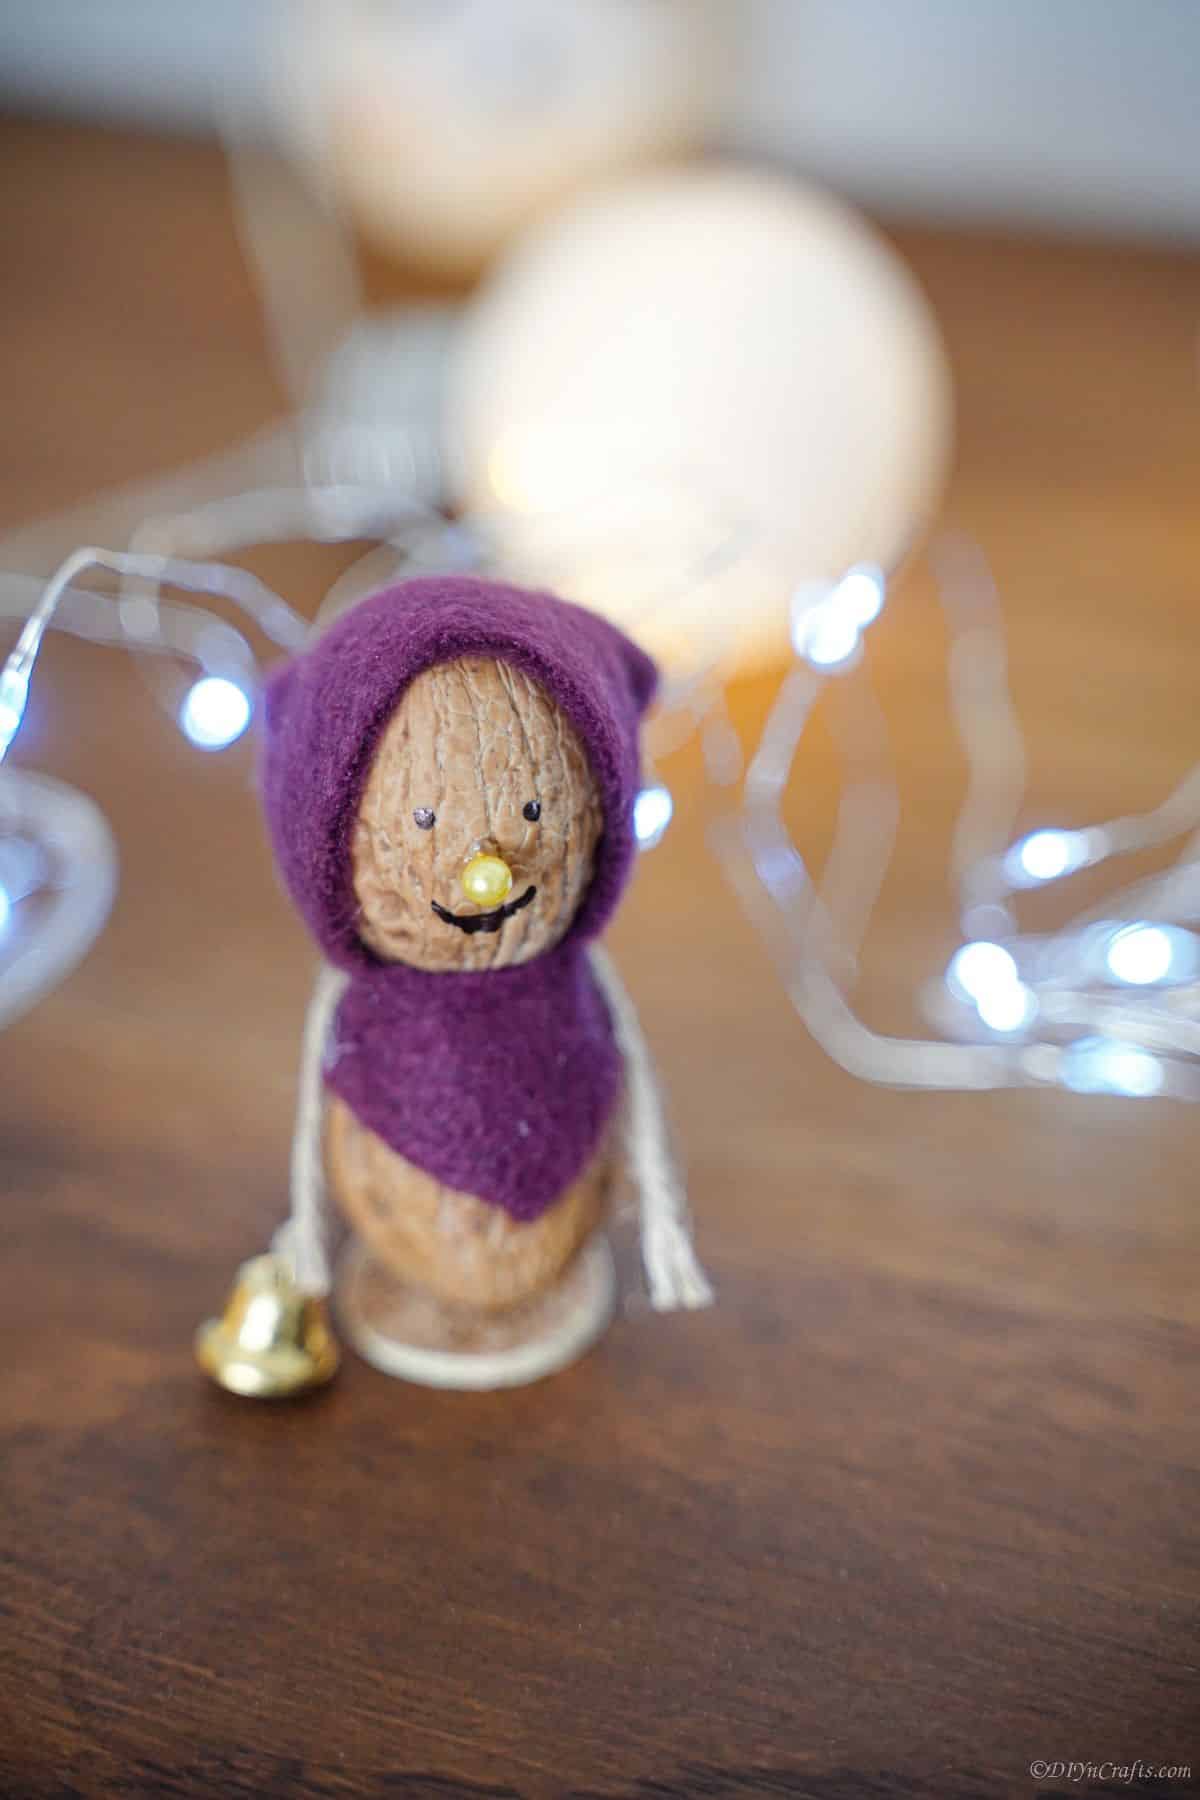 purple bonnet and scarf on fairy garden mouse sitting on wood table